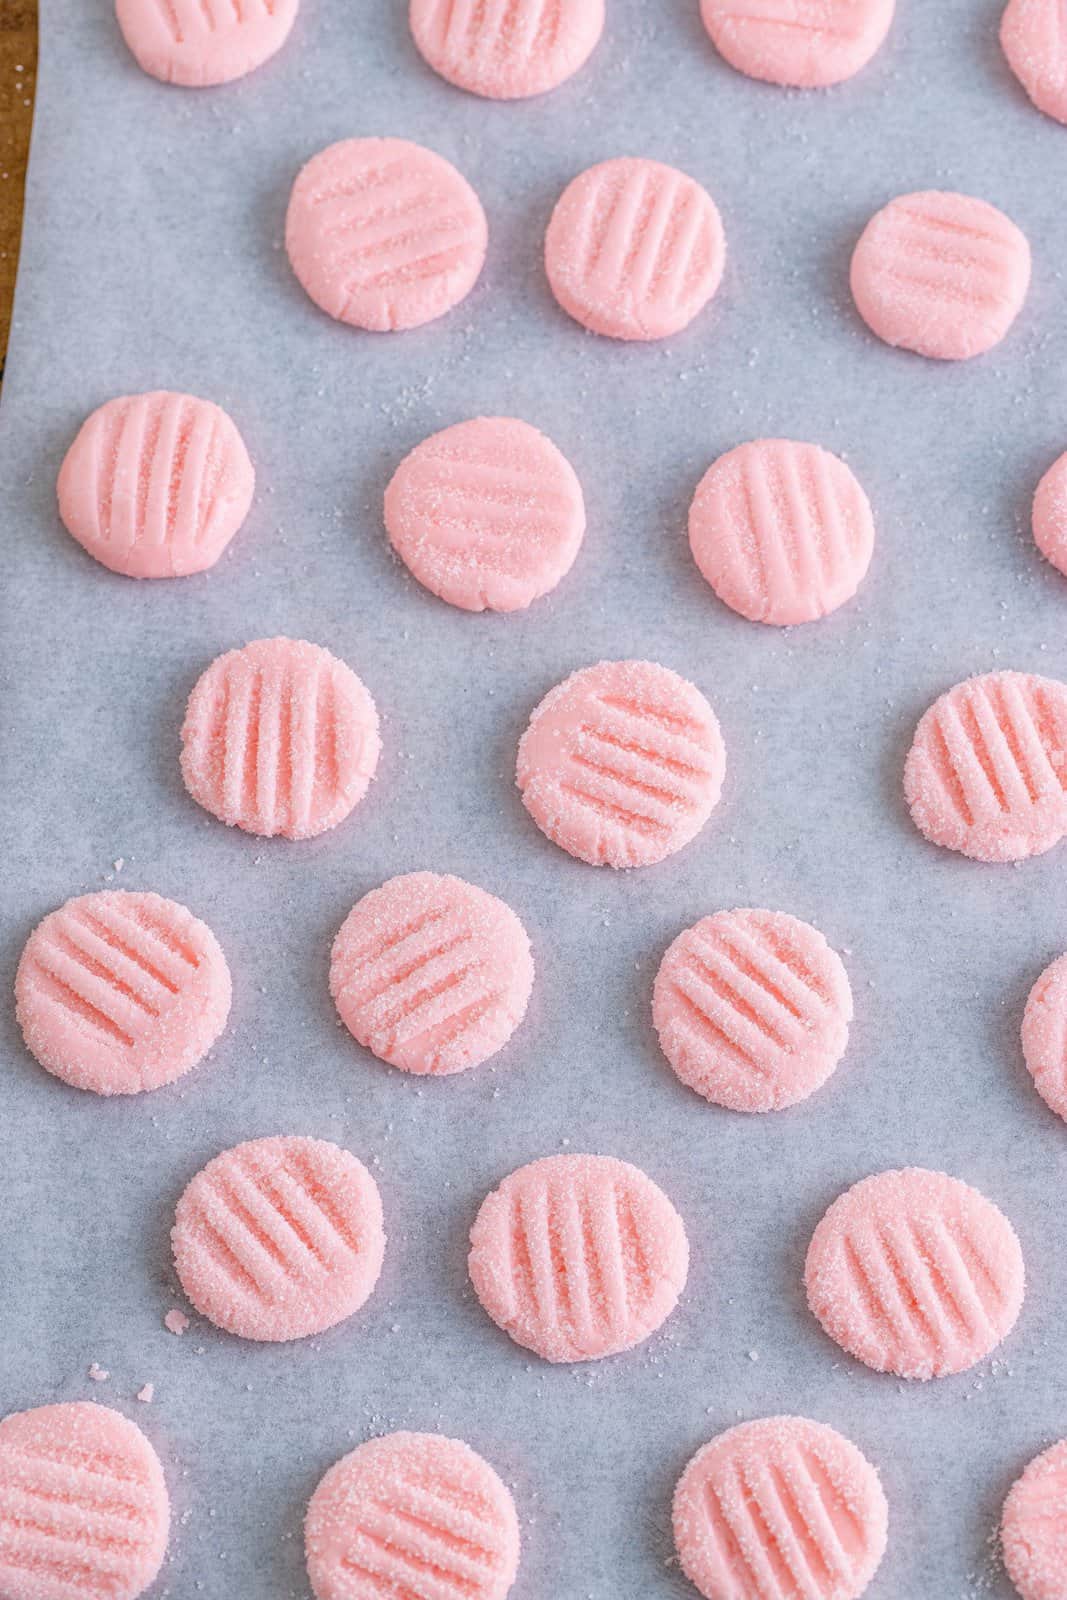 cream cheese mints fully made on parchment paper on a baking sheet.